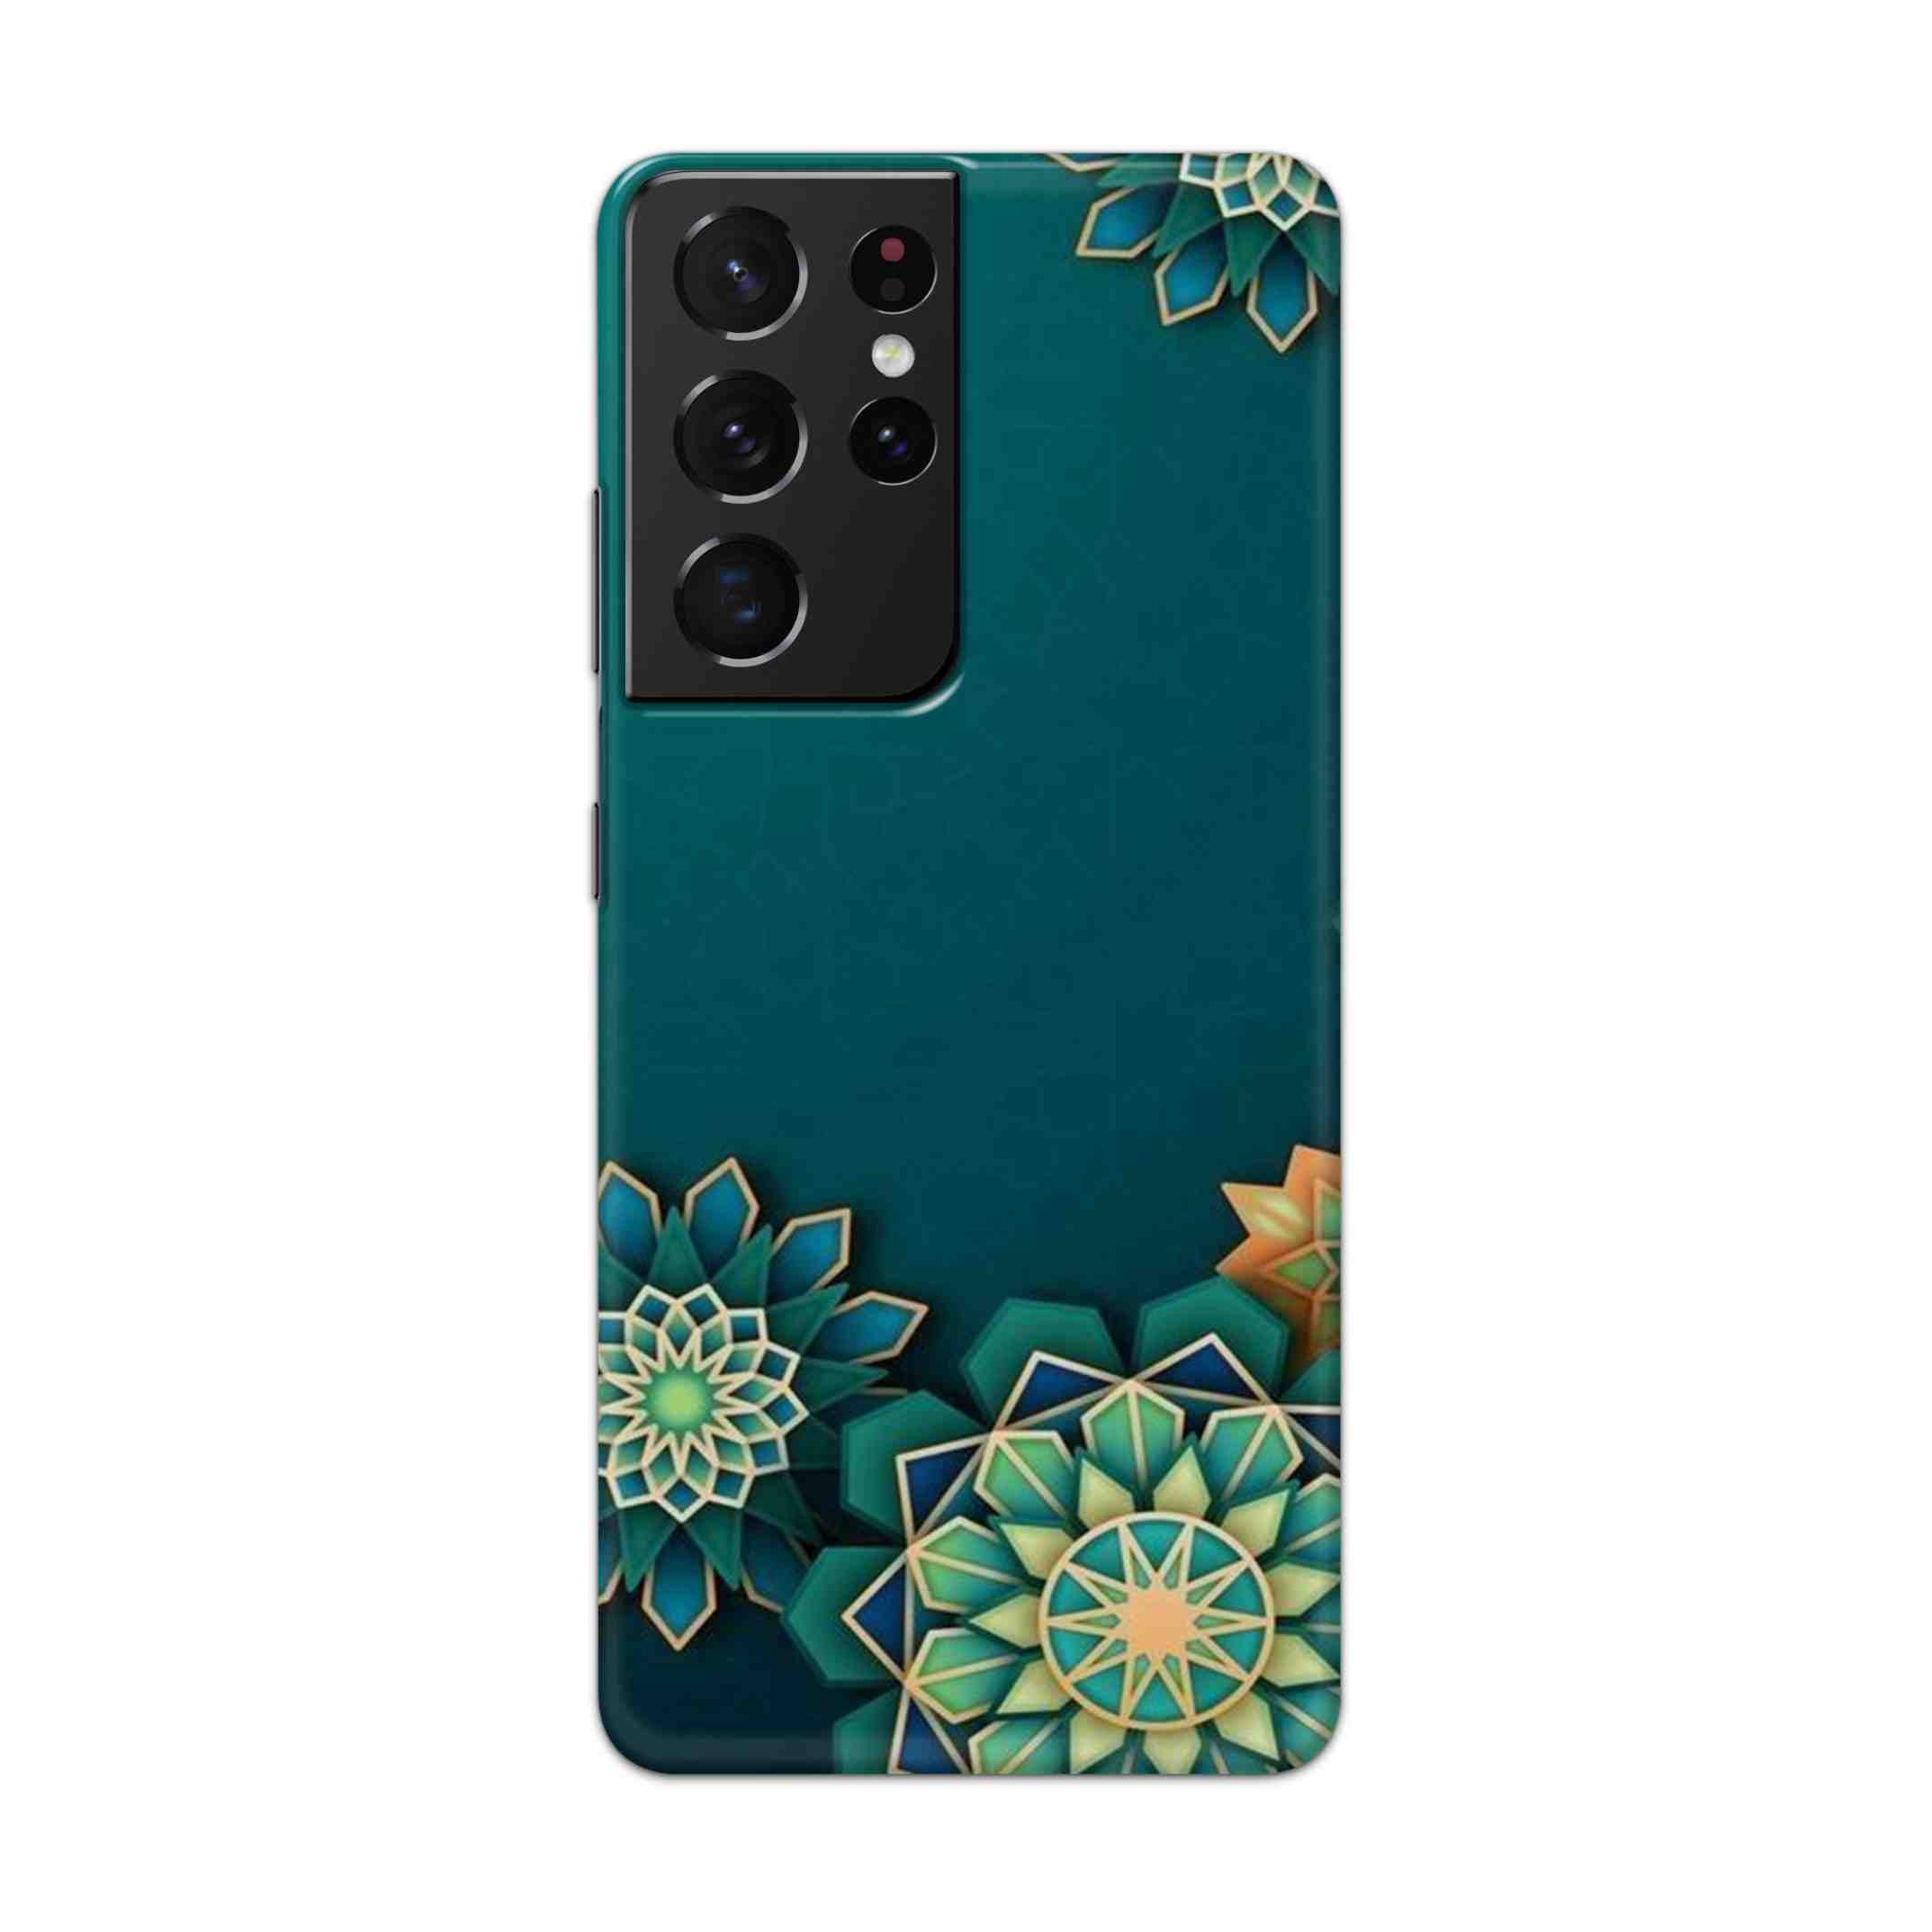 Buy Green Flower Hard Back Mobile Phone Case Cover For Samsung Galaxy S21 Ultra Online